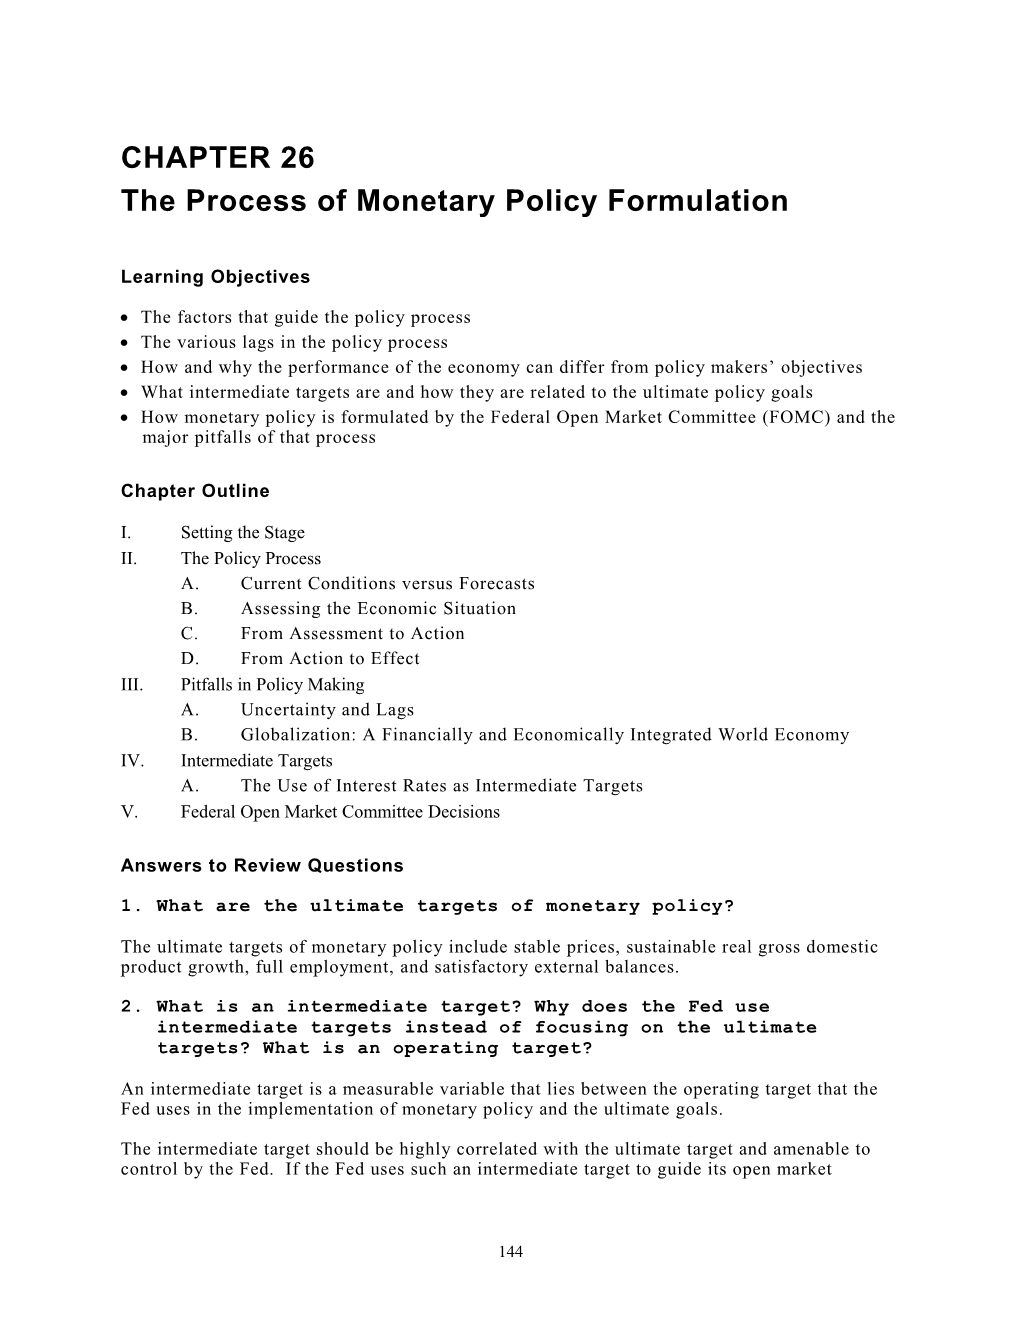 The Process of Monetary Policy Formulation